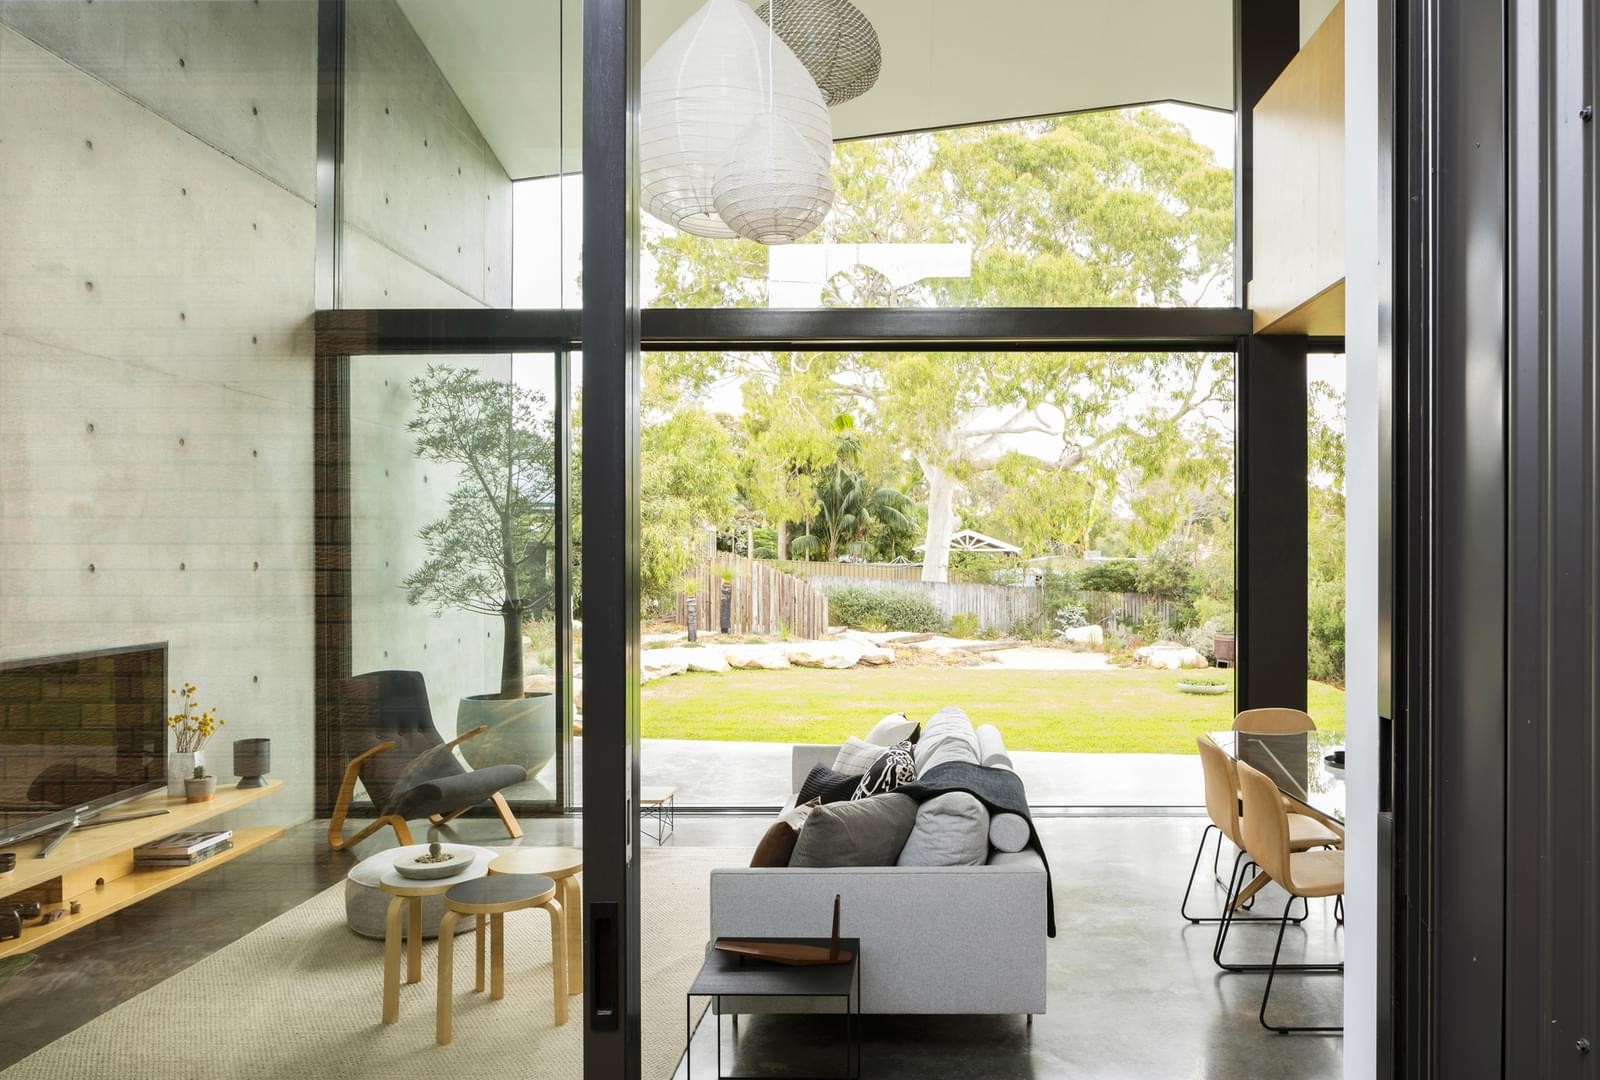 Expansion and modernization of an old bungalow in Australia